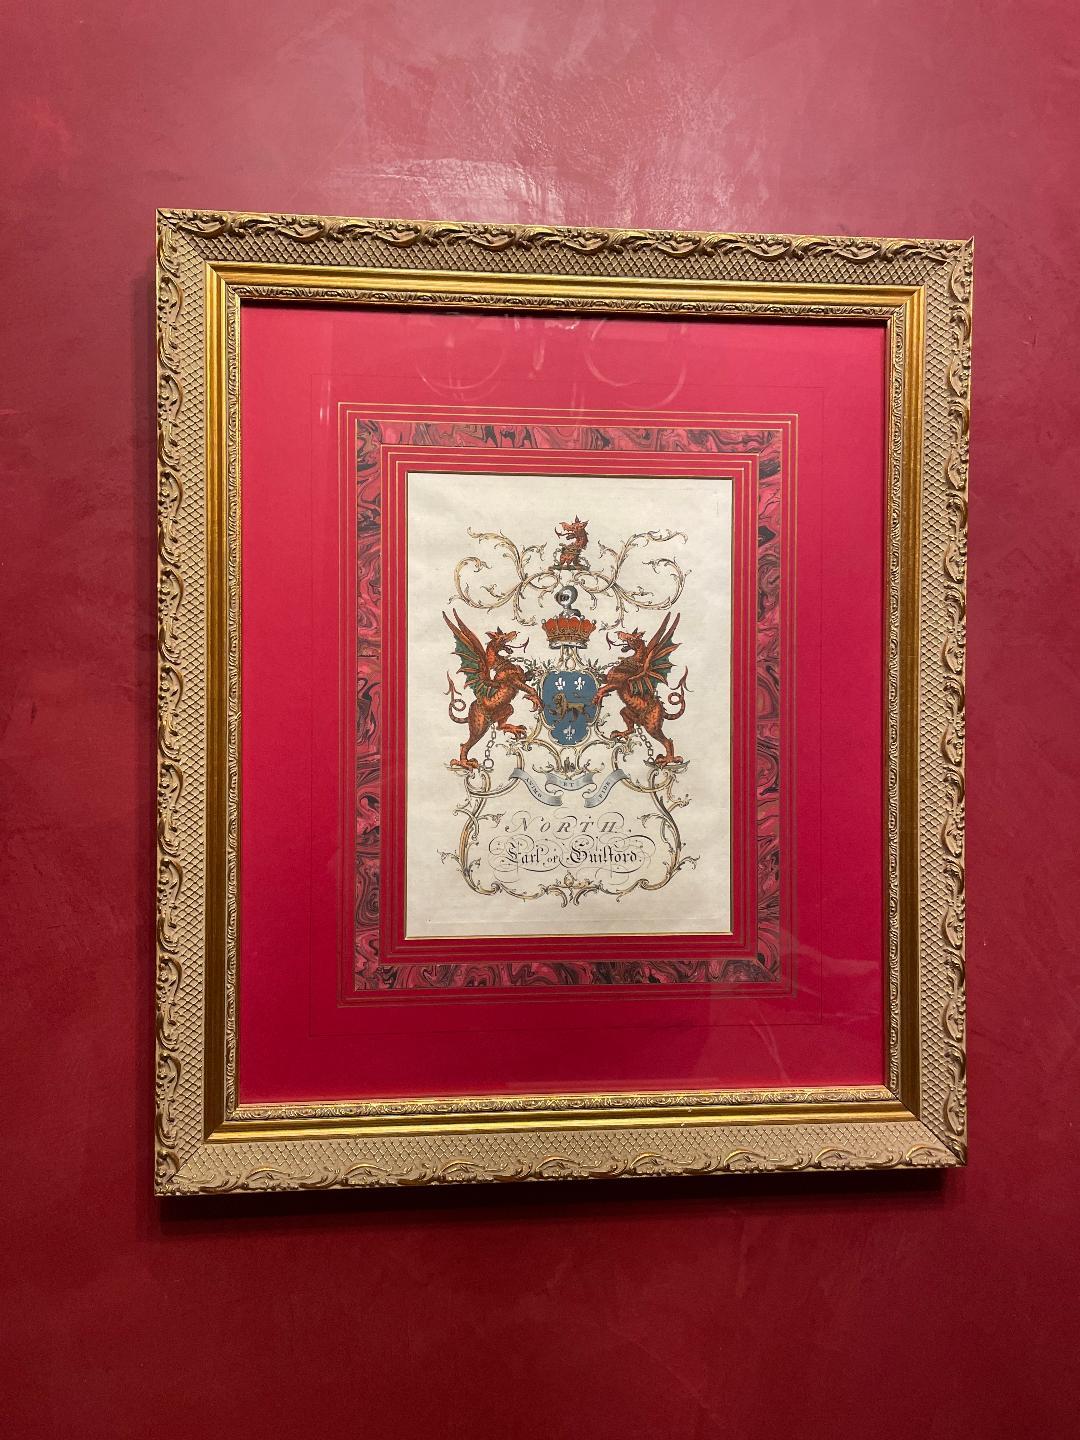 Heraldry crests emblazoned with red, blue, and pale colors.
Hand-colored in watercolor.
Striking style and impressive detail.
Beautifully framed.

Titles of each engraving:
Earl of Cardigan
Earl of Sandwich
Fritz Williams
North Earl of Guifford